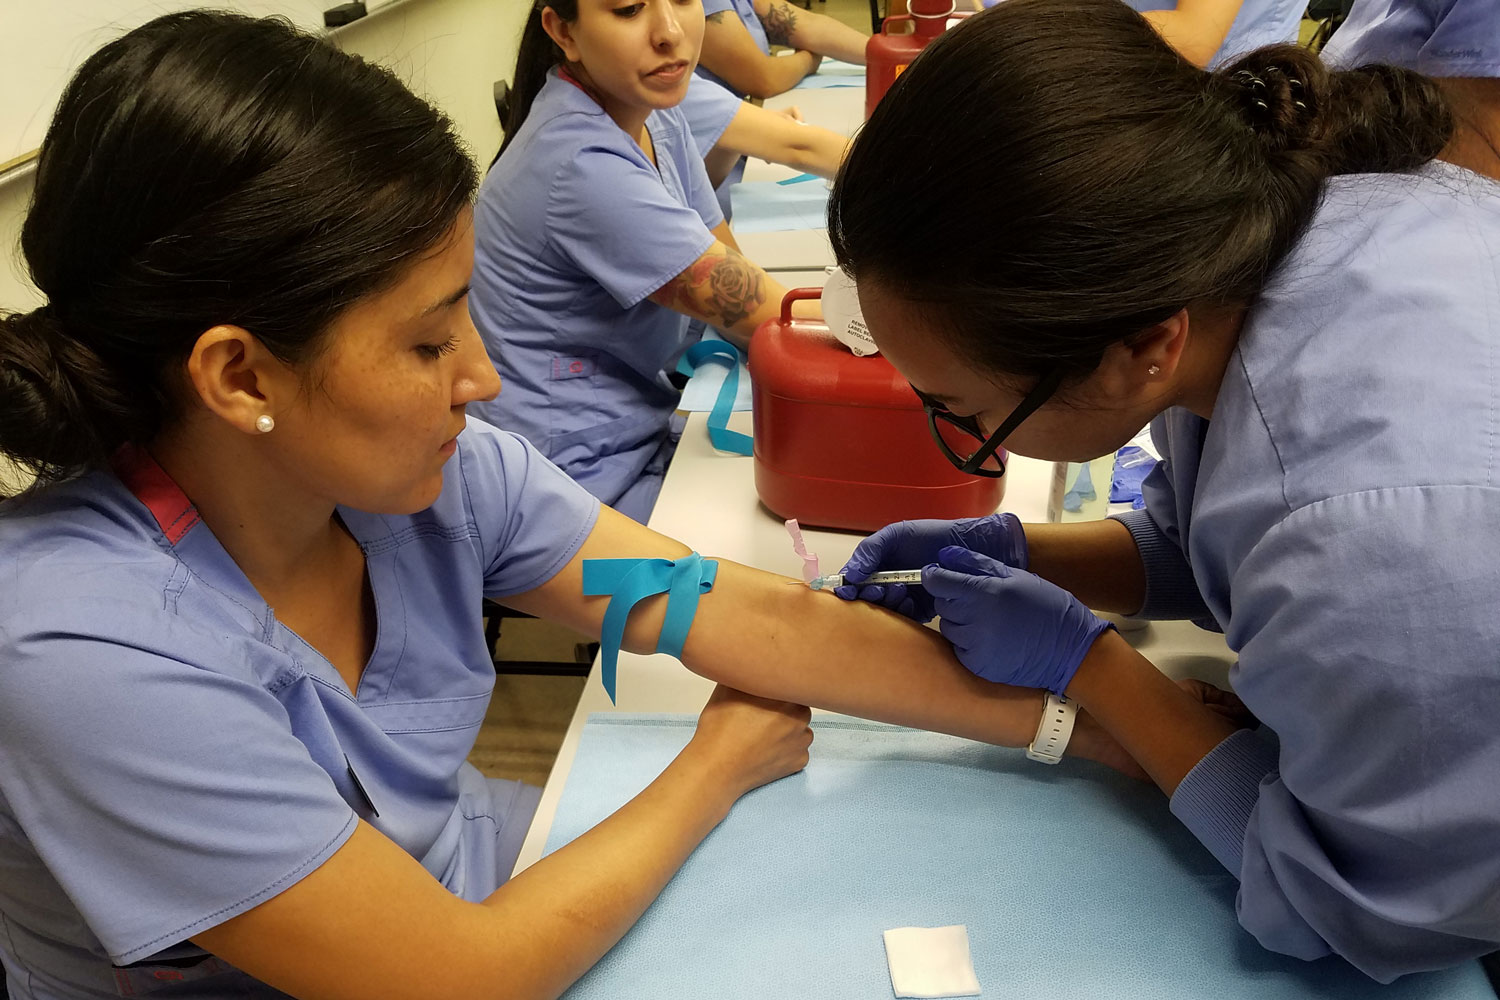 A medical assisting professor helps a student during a lab course.